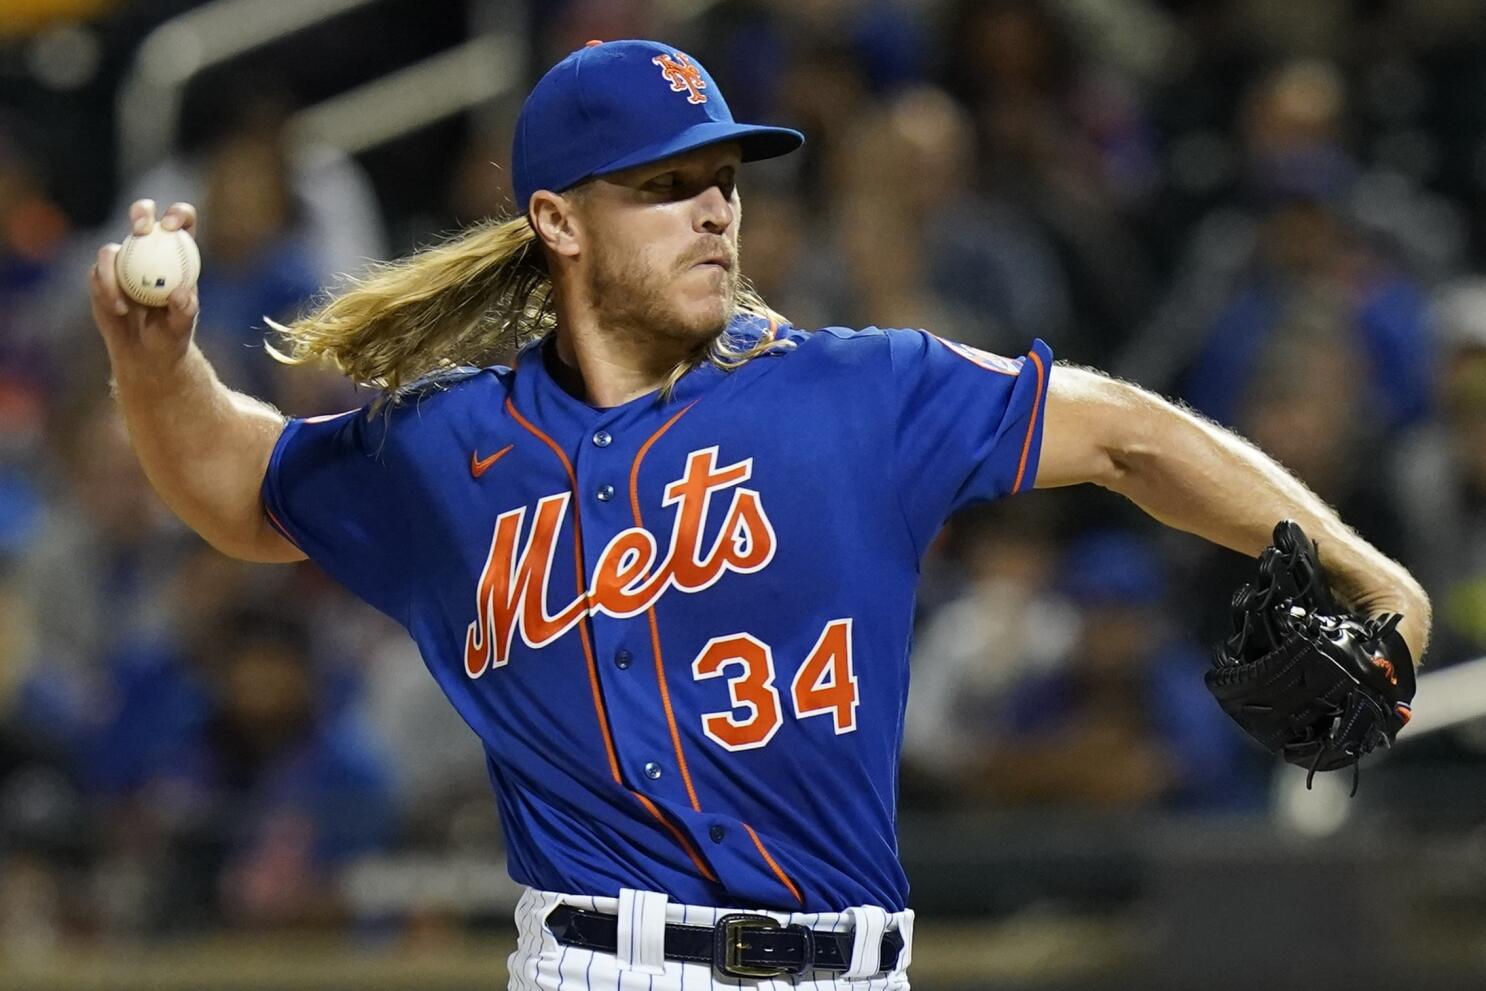 Three Mets players we cannot trust heading into the 2020 season